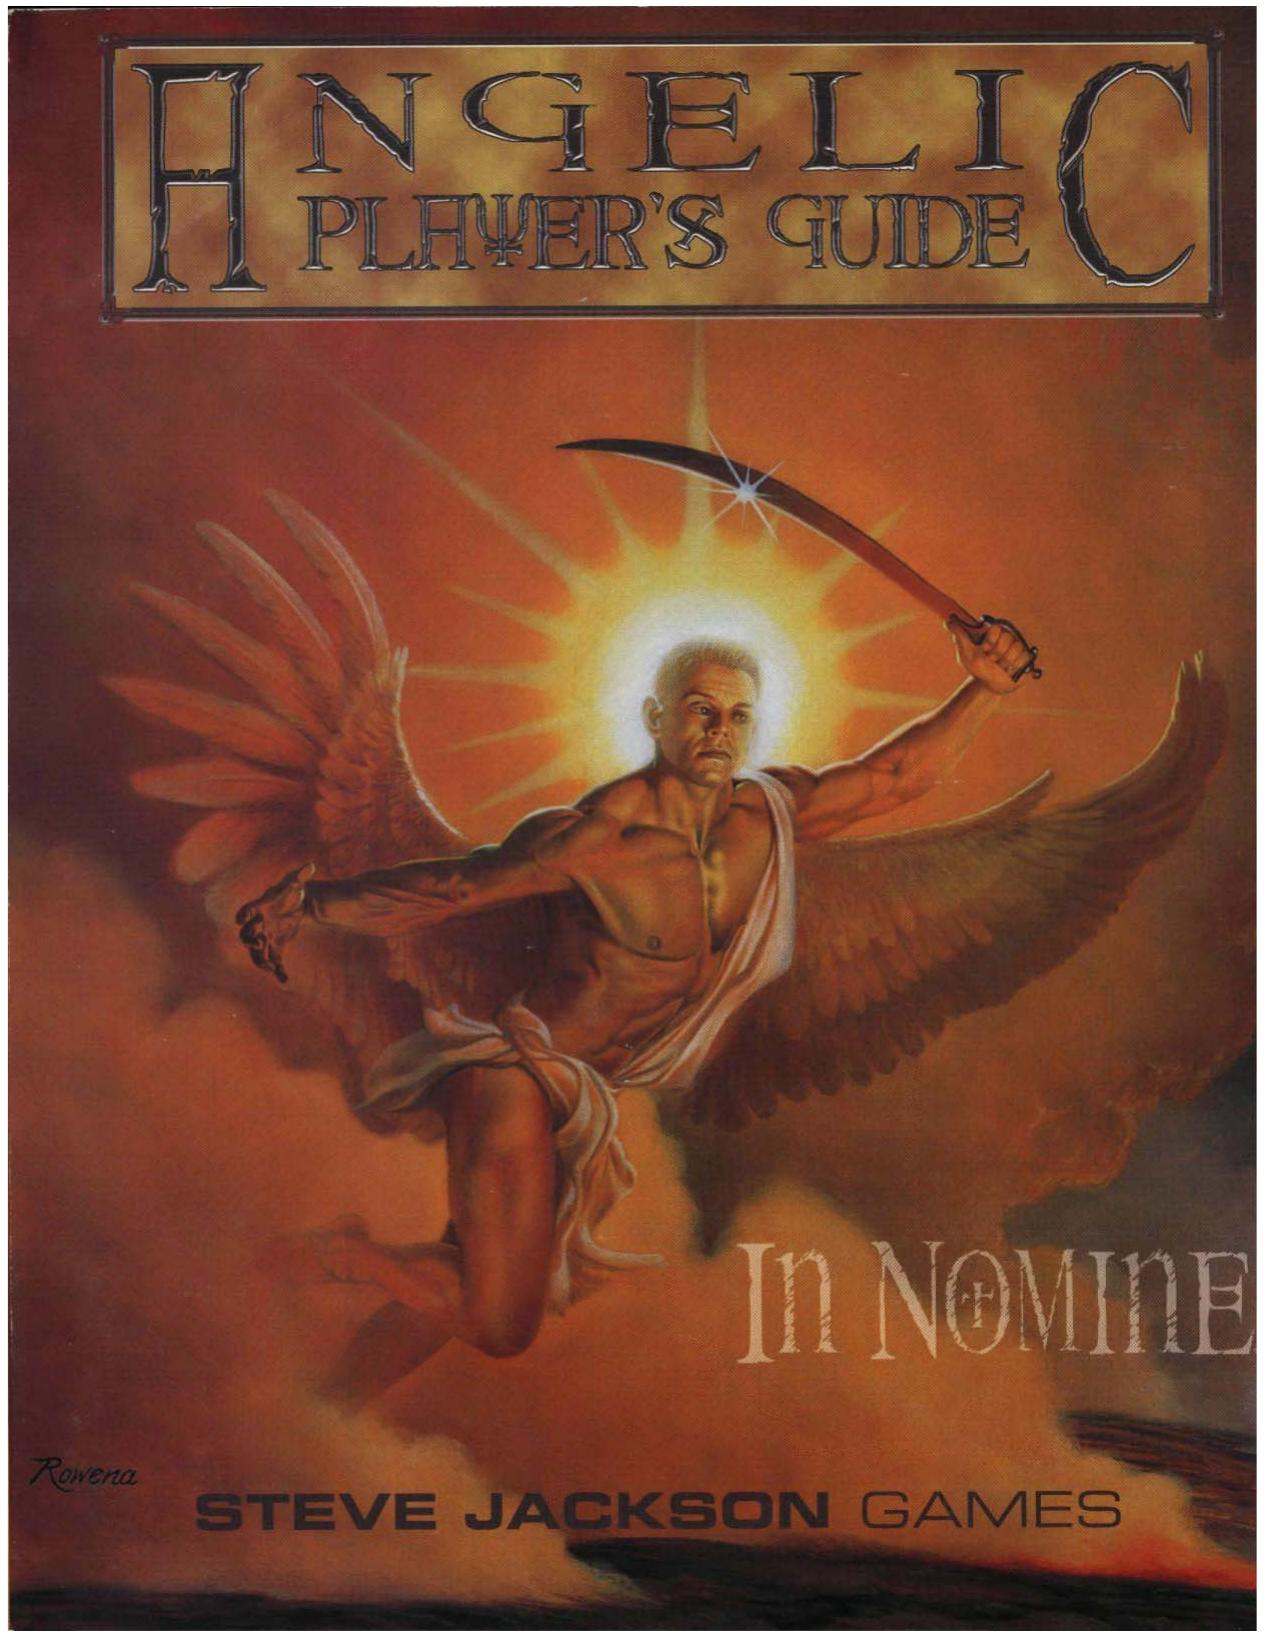 Angelic Player's Guide